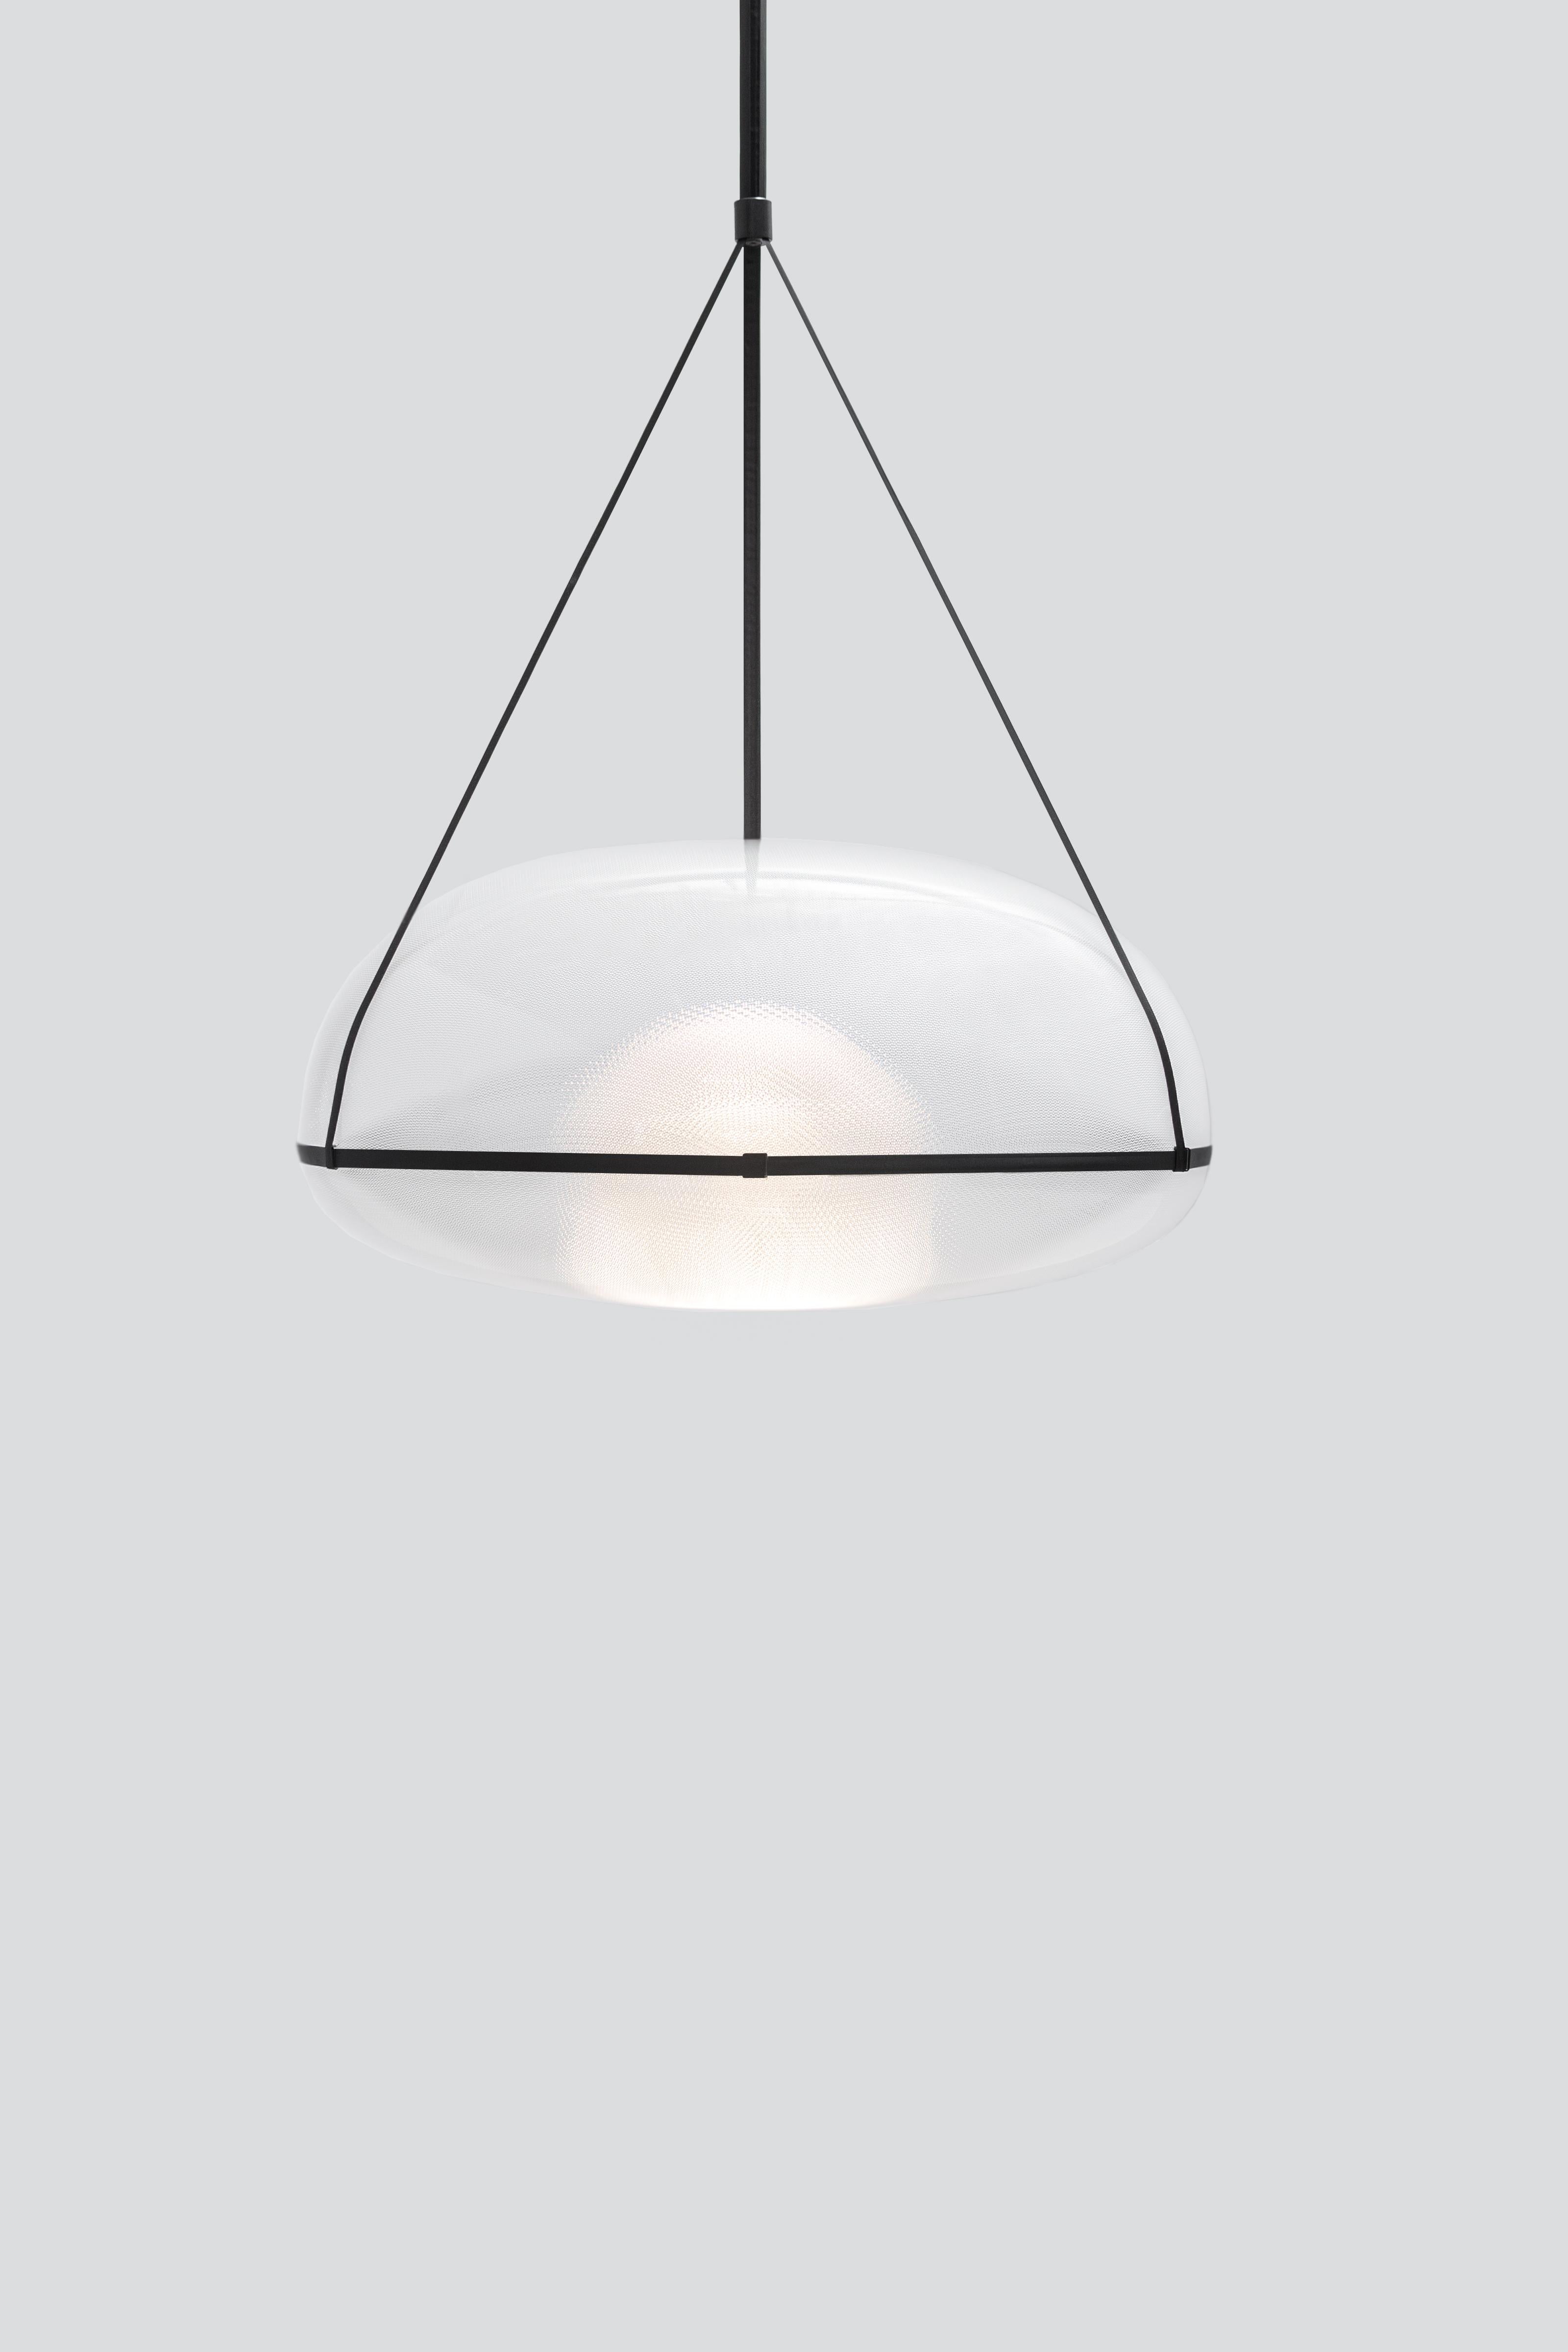 Contemporary pendant lamp 'Iris'

Electrical : 
Voltage: 120 V – 277 V 
Lamp: Integral 34 W 35 V DC LED

The model shown in picture:
- Dimensions Diameter. 90 cm Height. 45 cm 
- Finish: Black
- Wire height: 300 cm (adjustable drop length)
- Modules